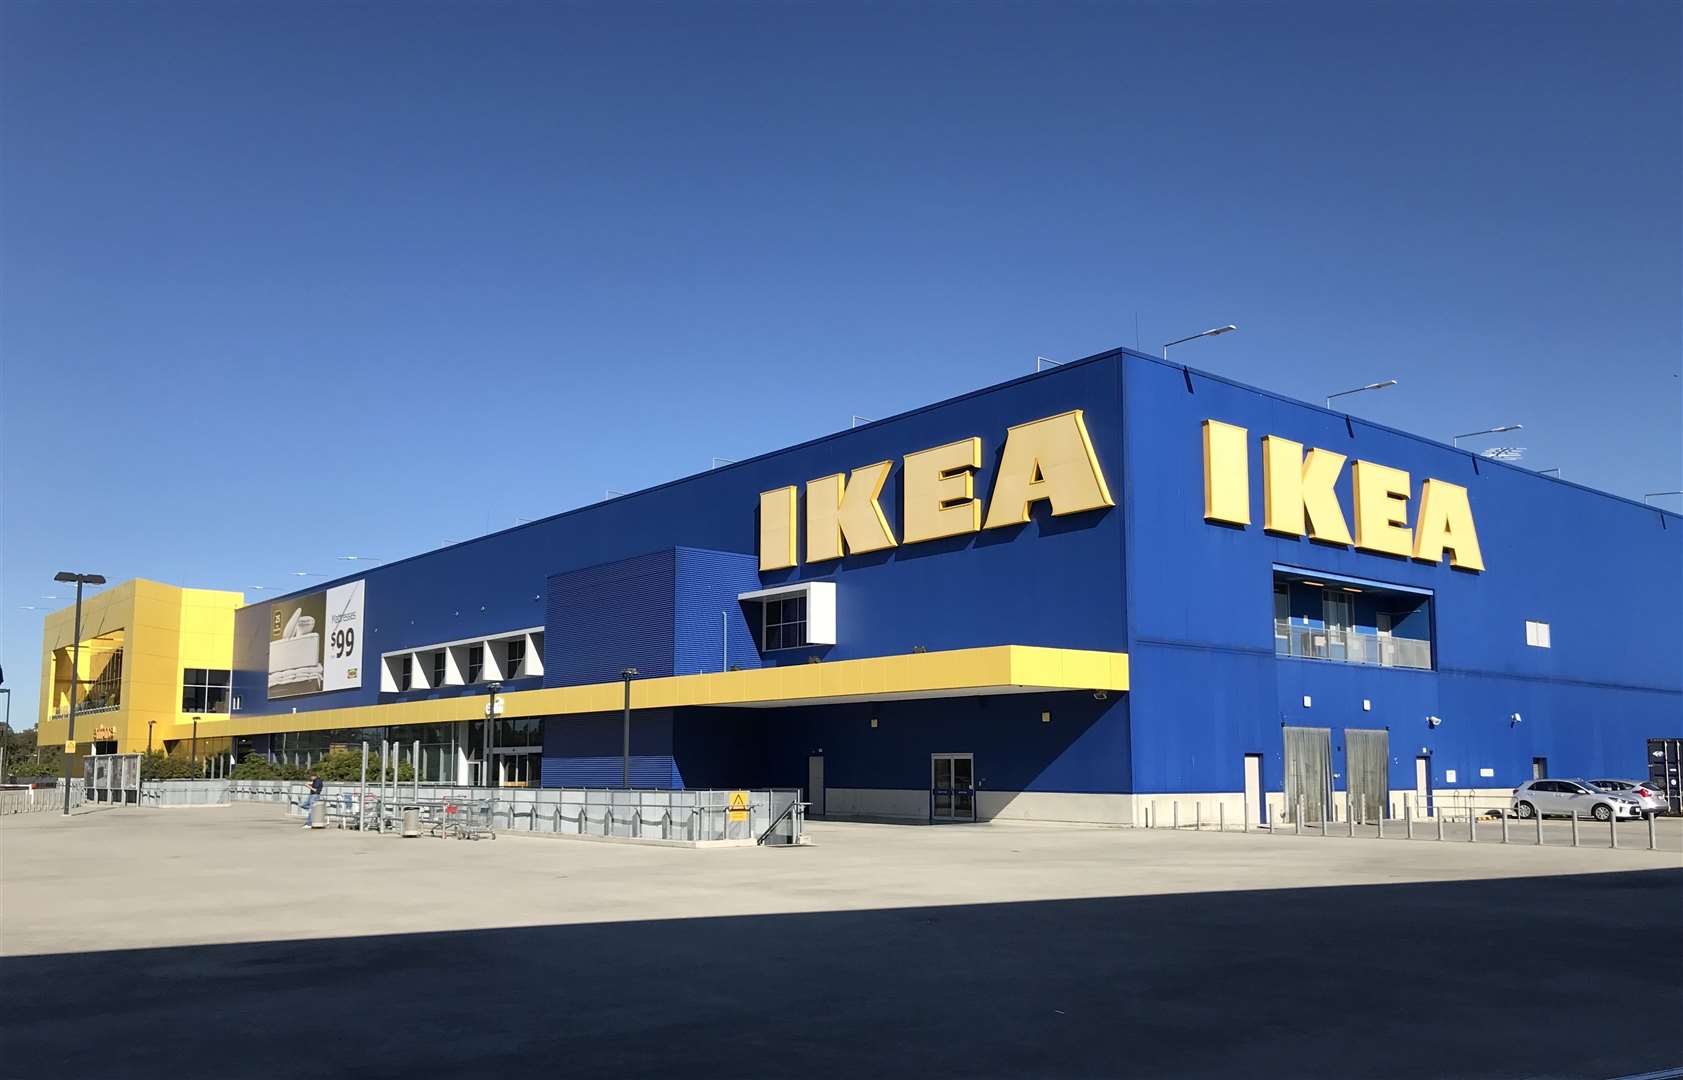 Ikea currently has 26 stores in the UK